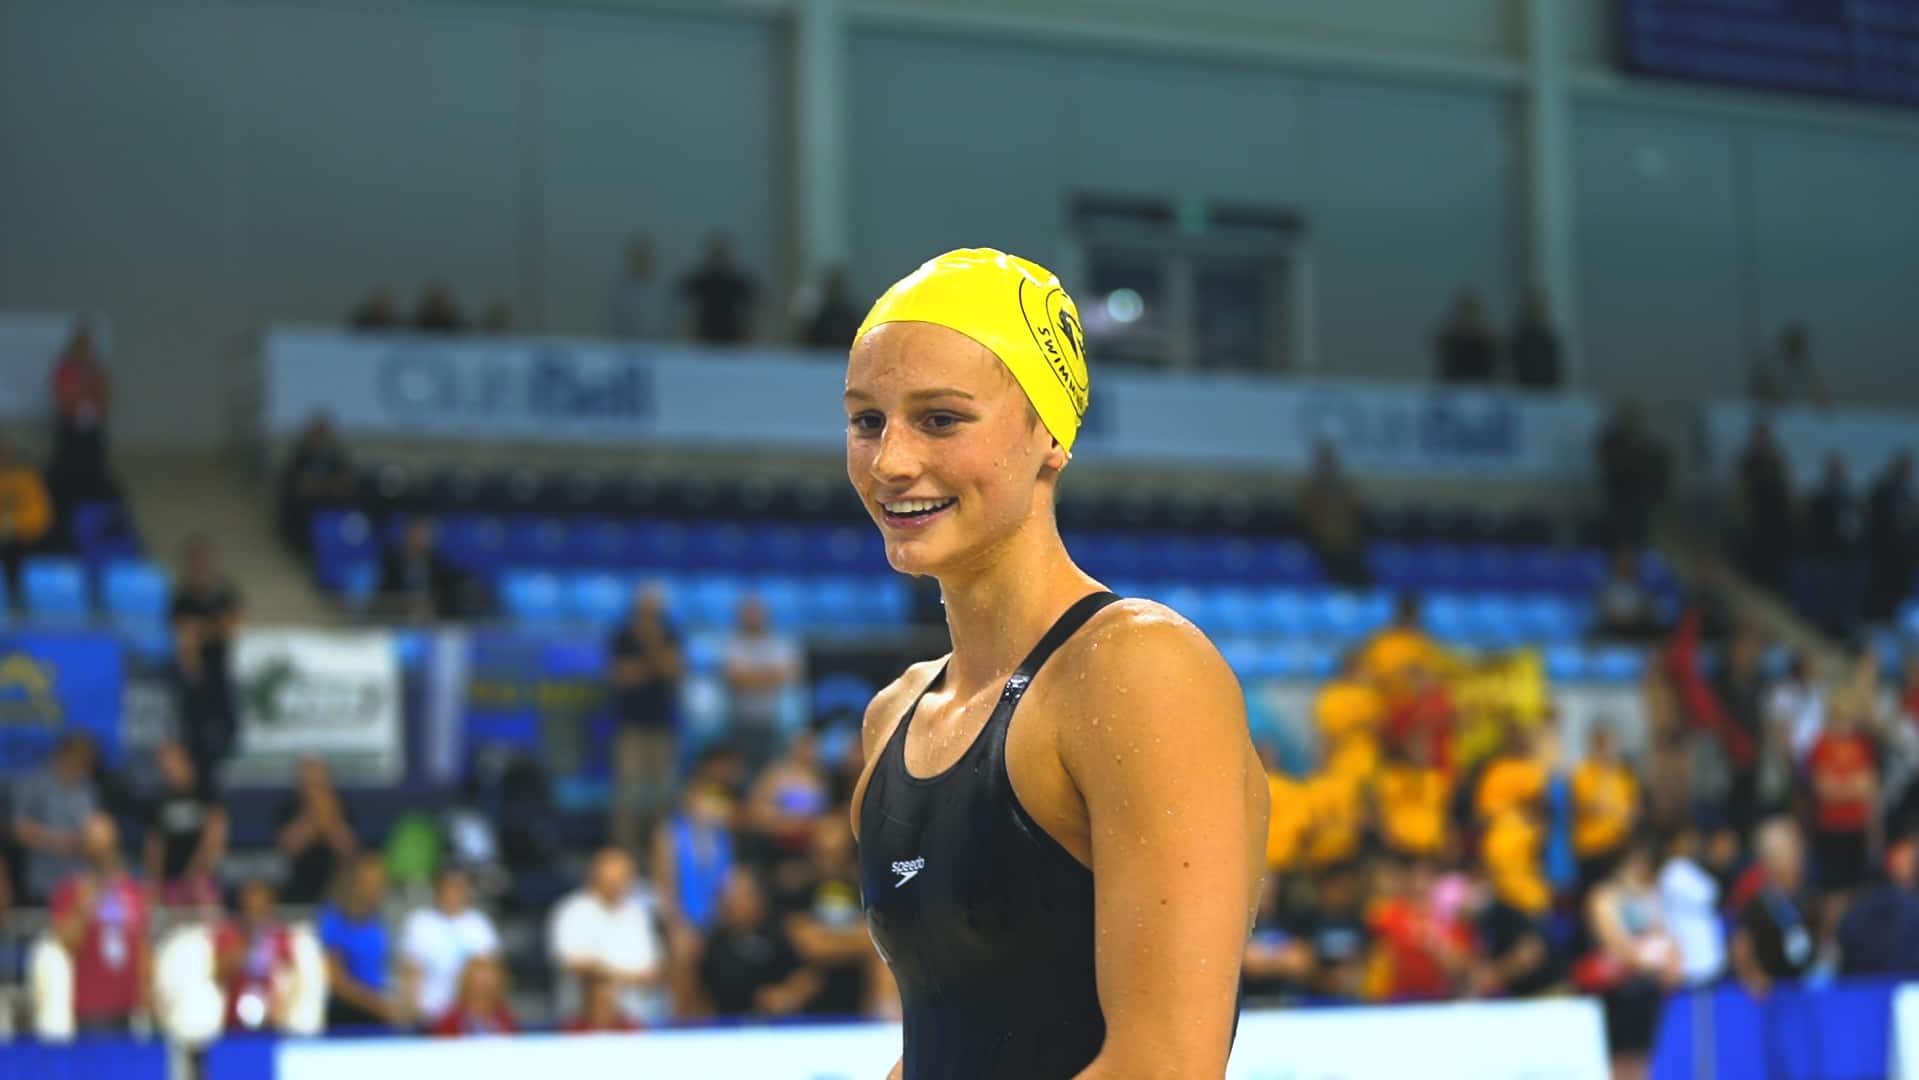 summer mcintosh caps historic week at national trials with world junior canadian records in 200m freestyle 2